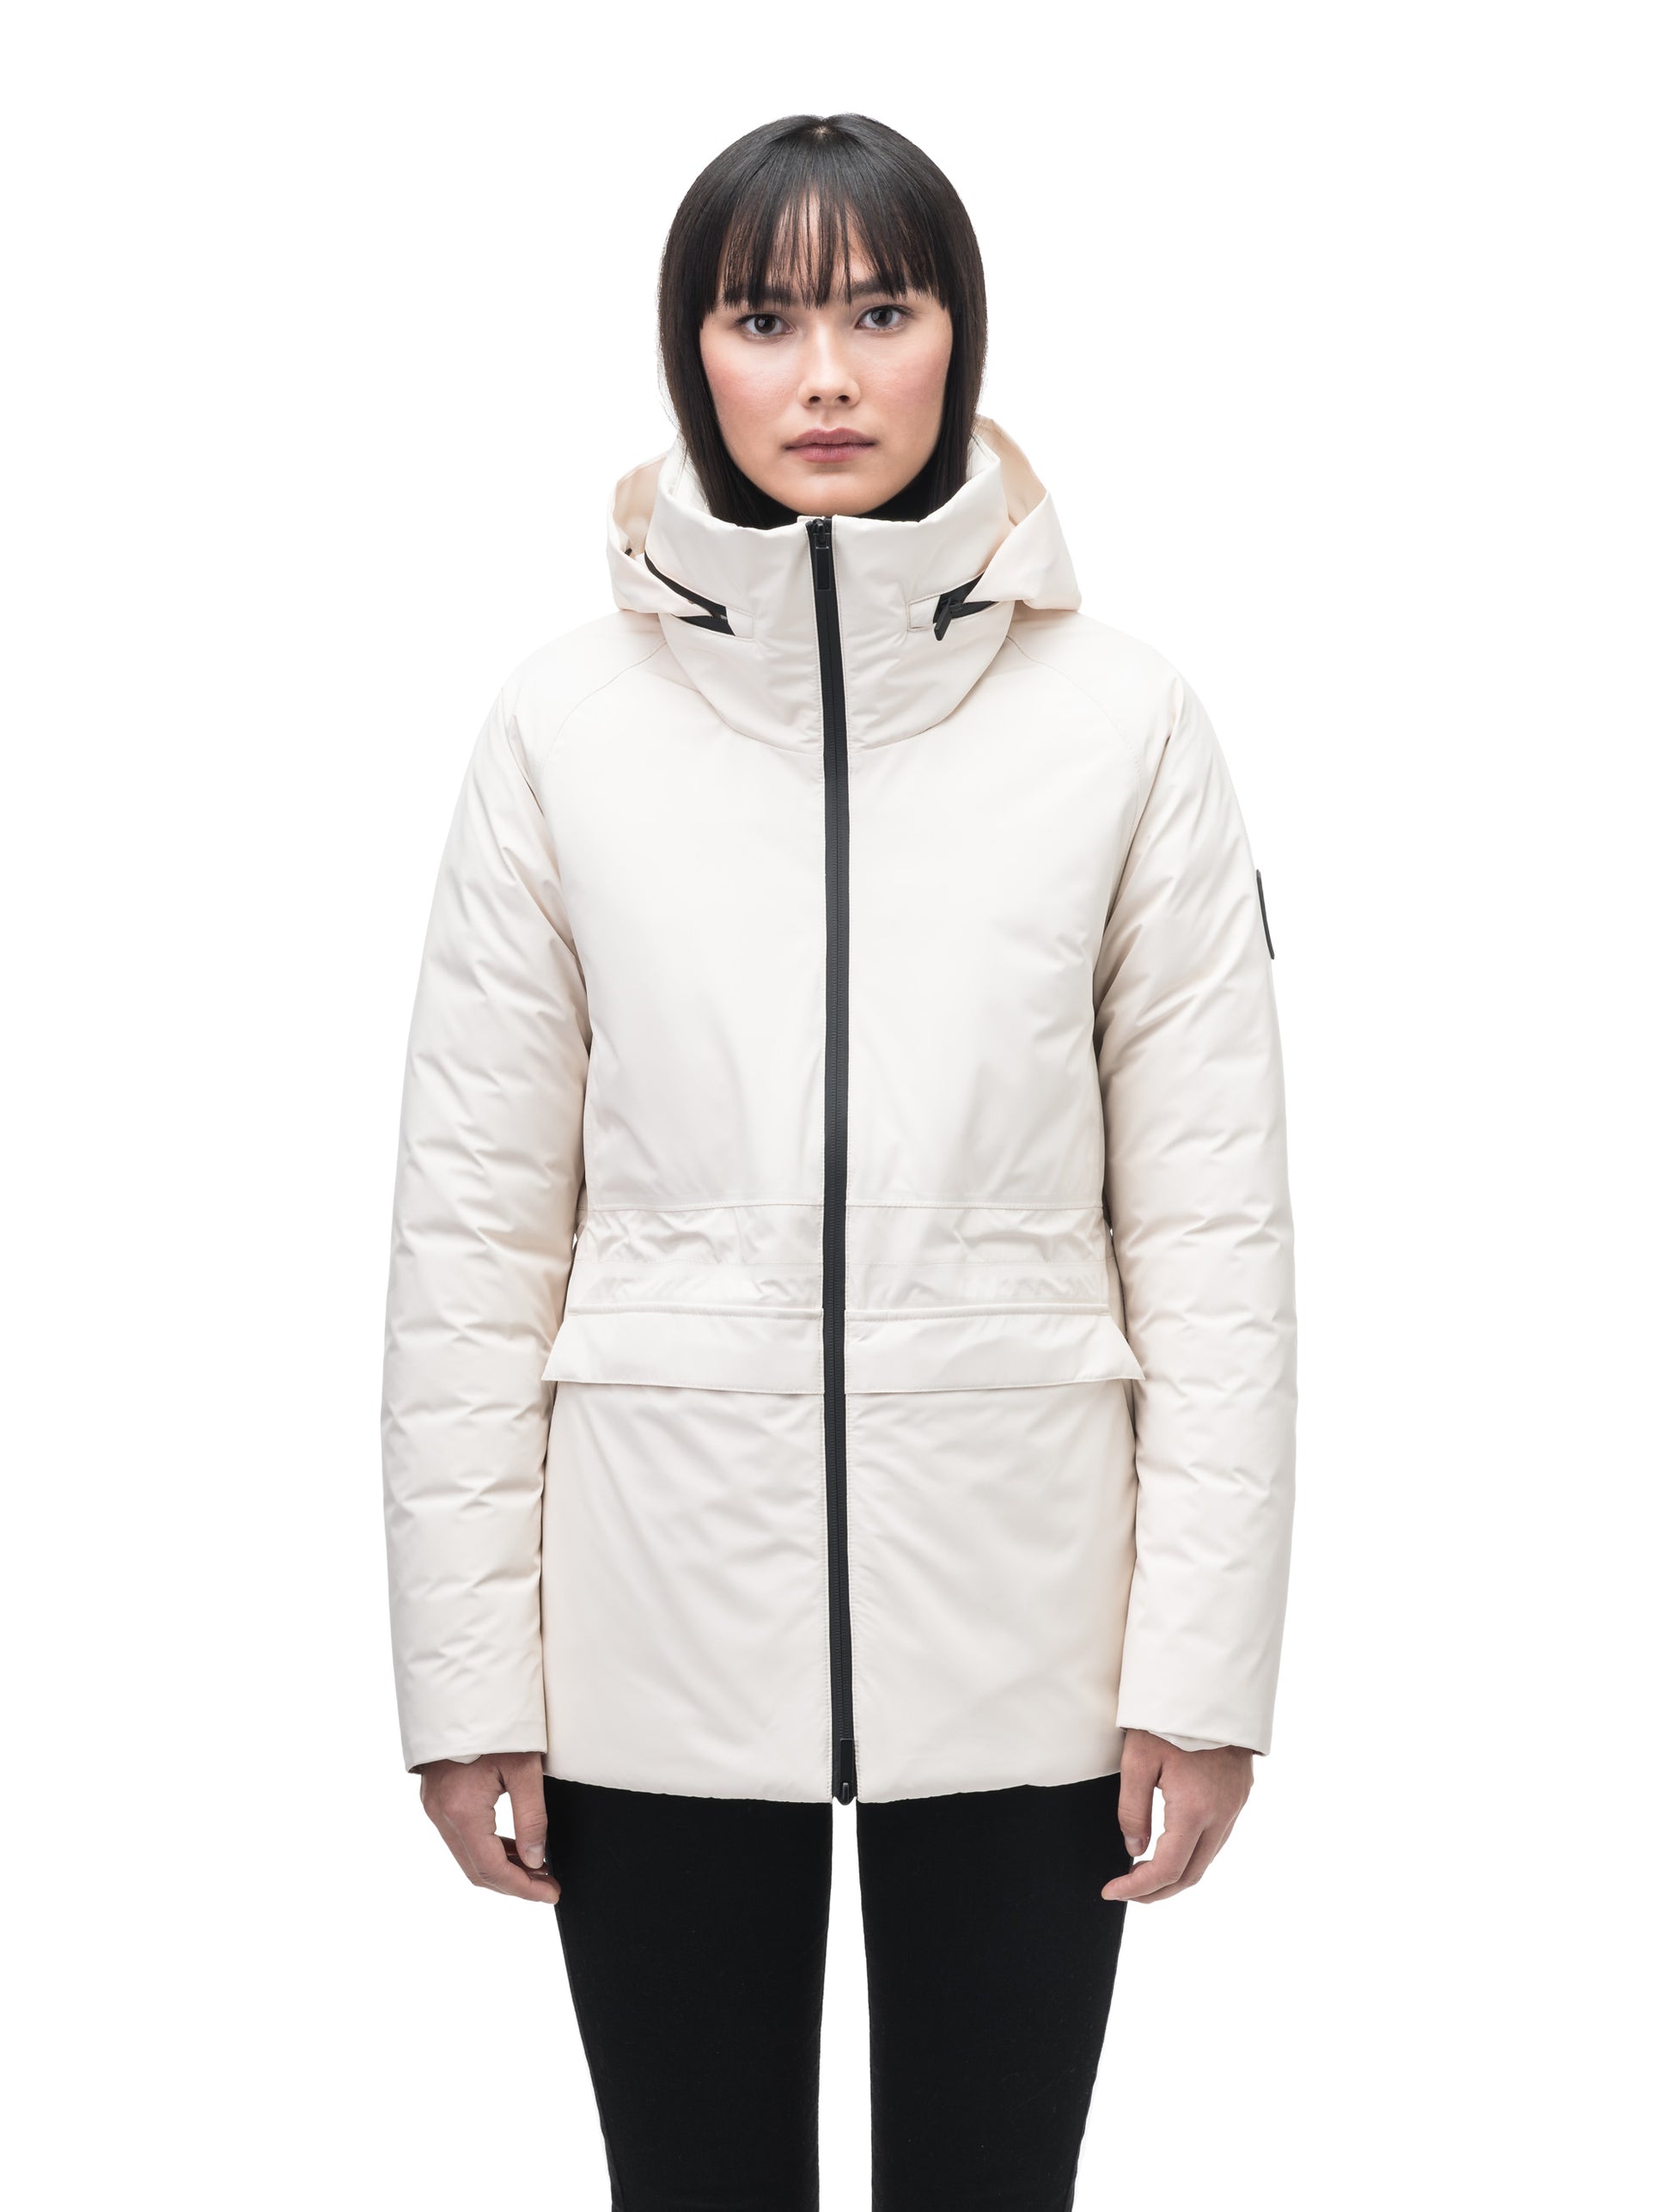 Litho Ladies Short Parka in hip length, Canadian duck down insulation, tuckable waterproof hood, and two-way zipper, in Wheat